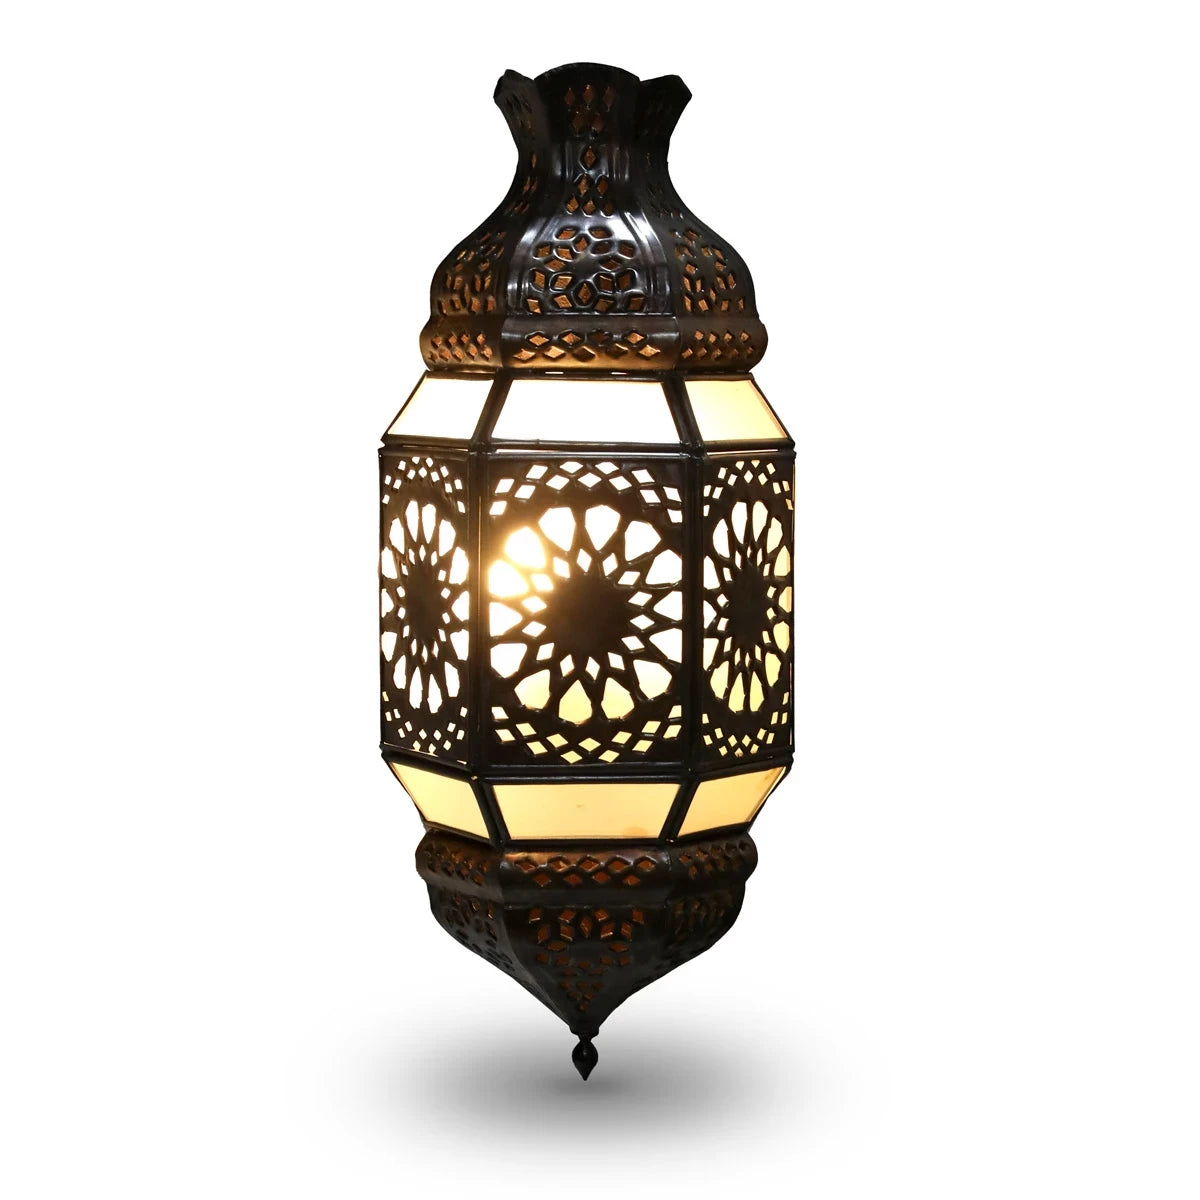 Front View of Syrian Wall Light Decor with Lights on